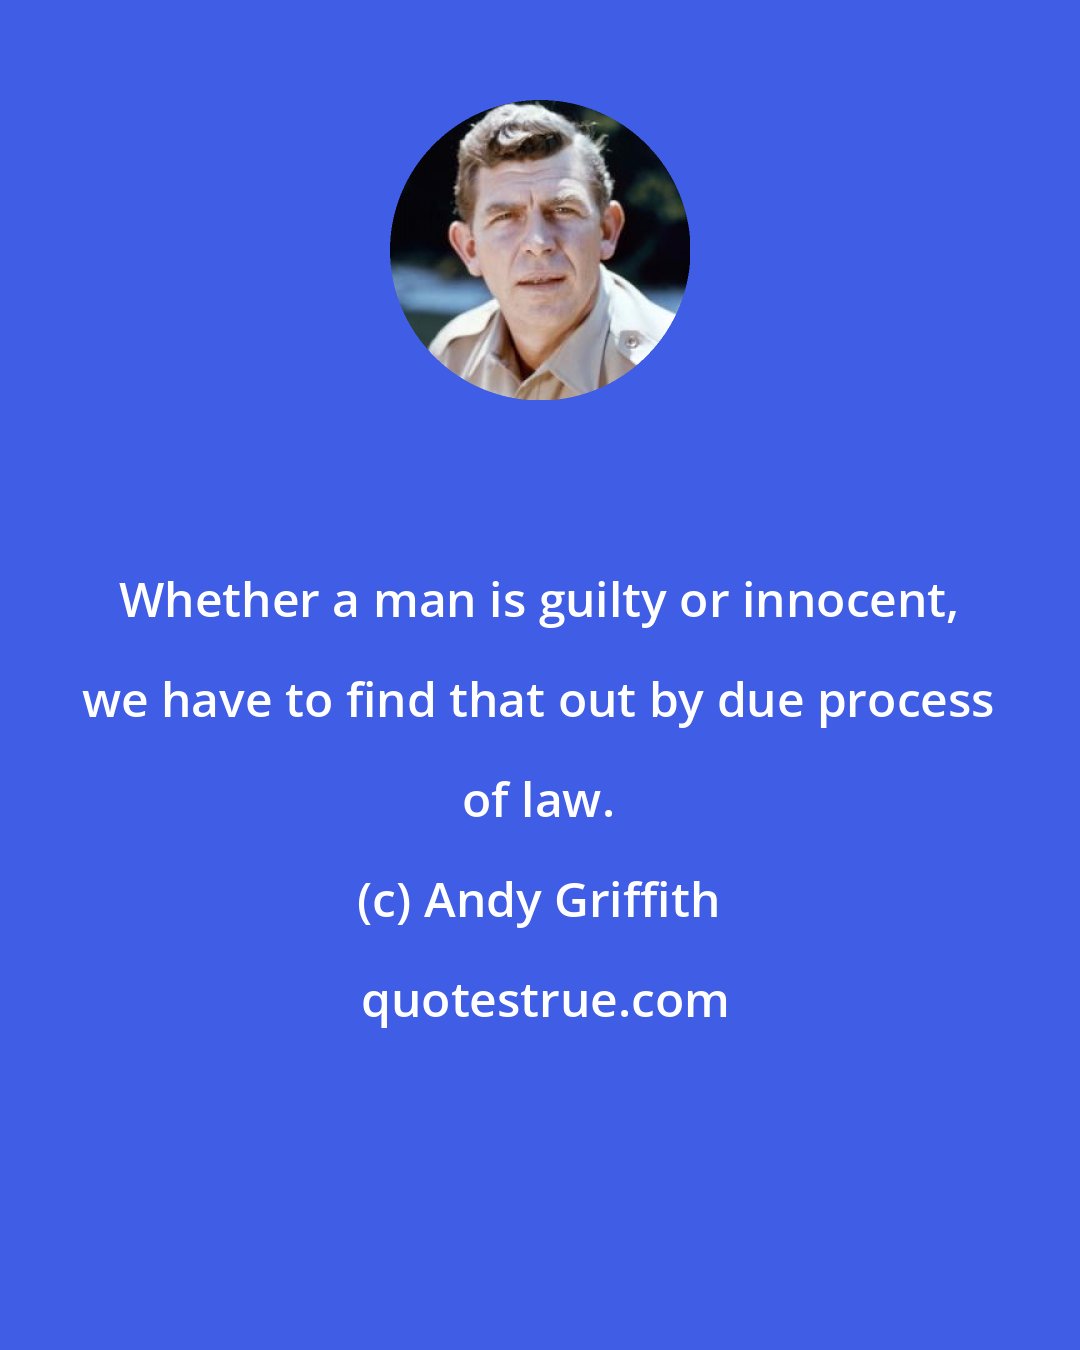 Andy Griffith: Whether a man is guilty or innocent, we have to find that out by due process of law.